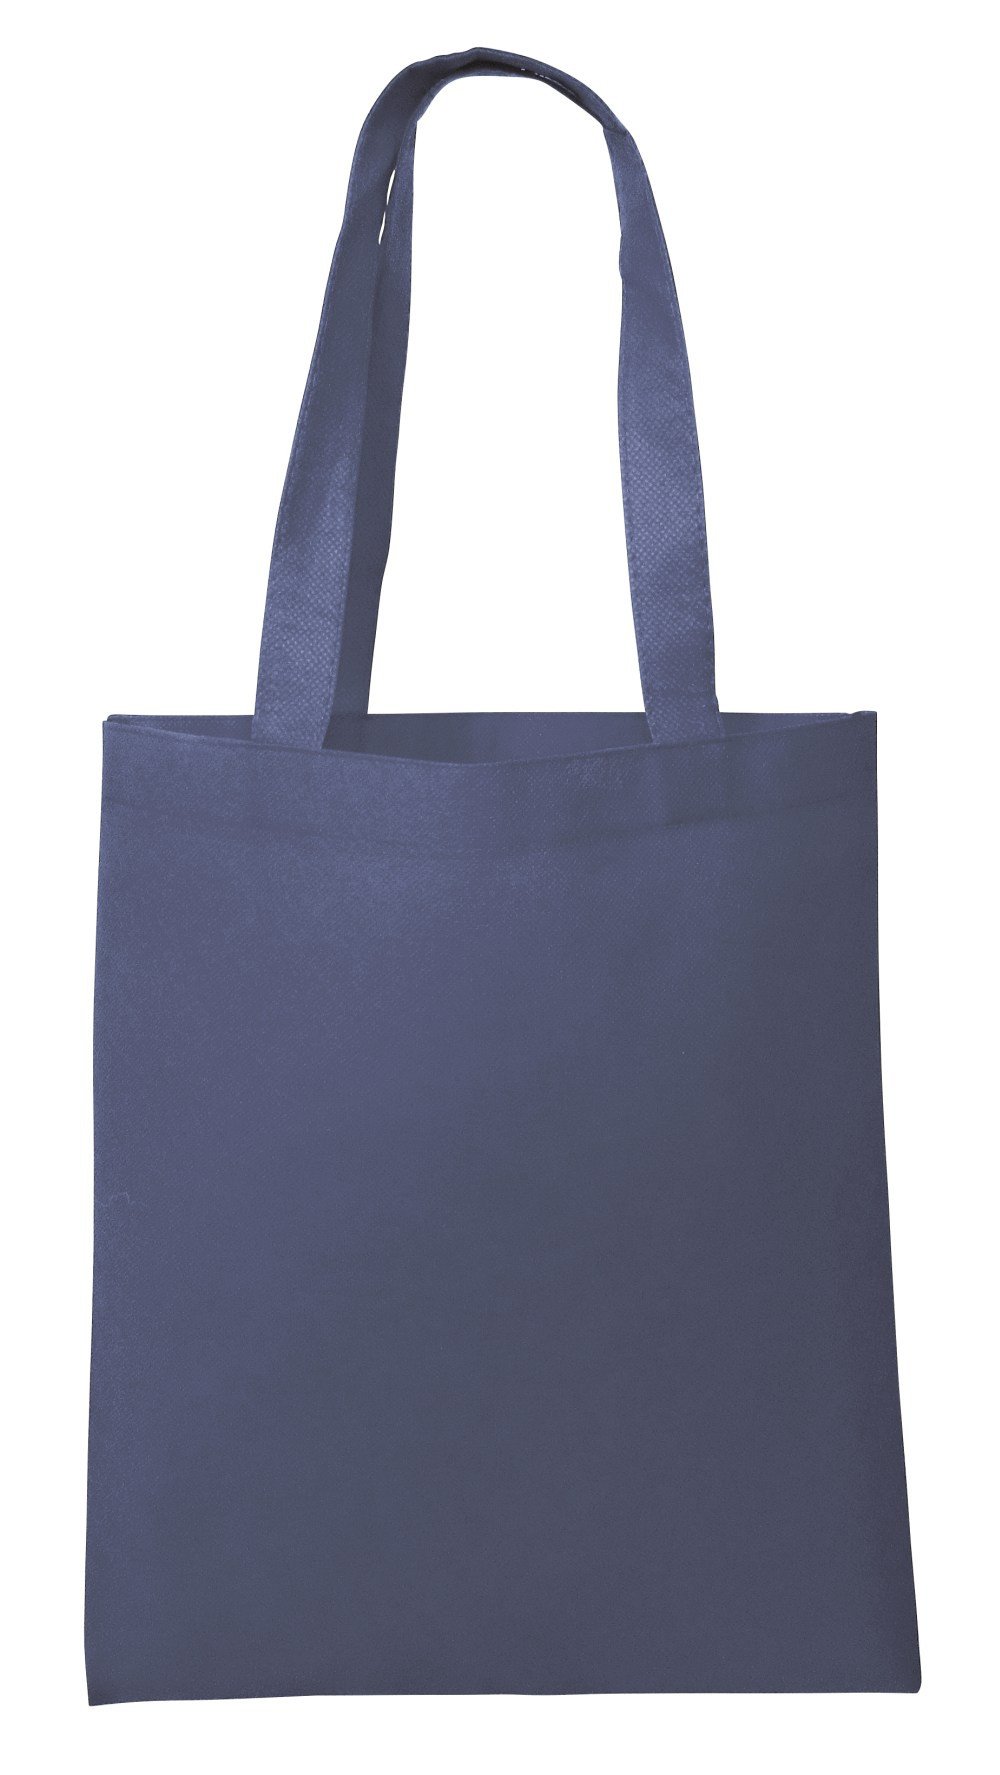 Cheap Promotional Tote Bags navy